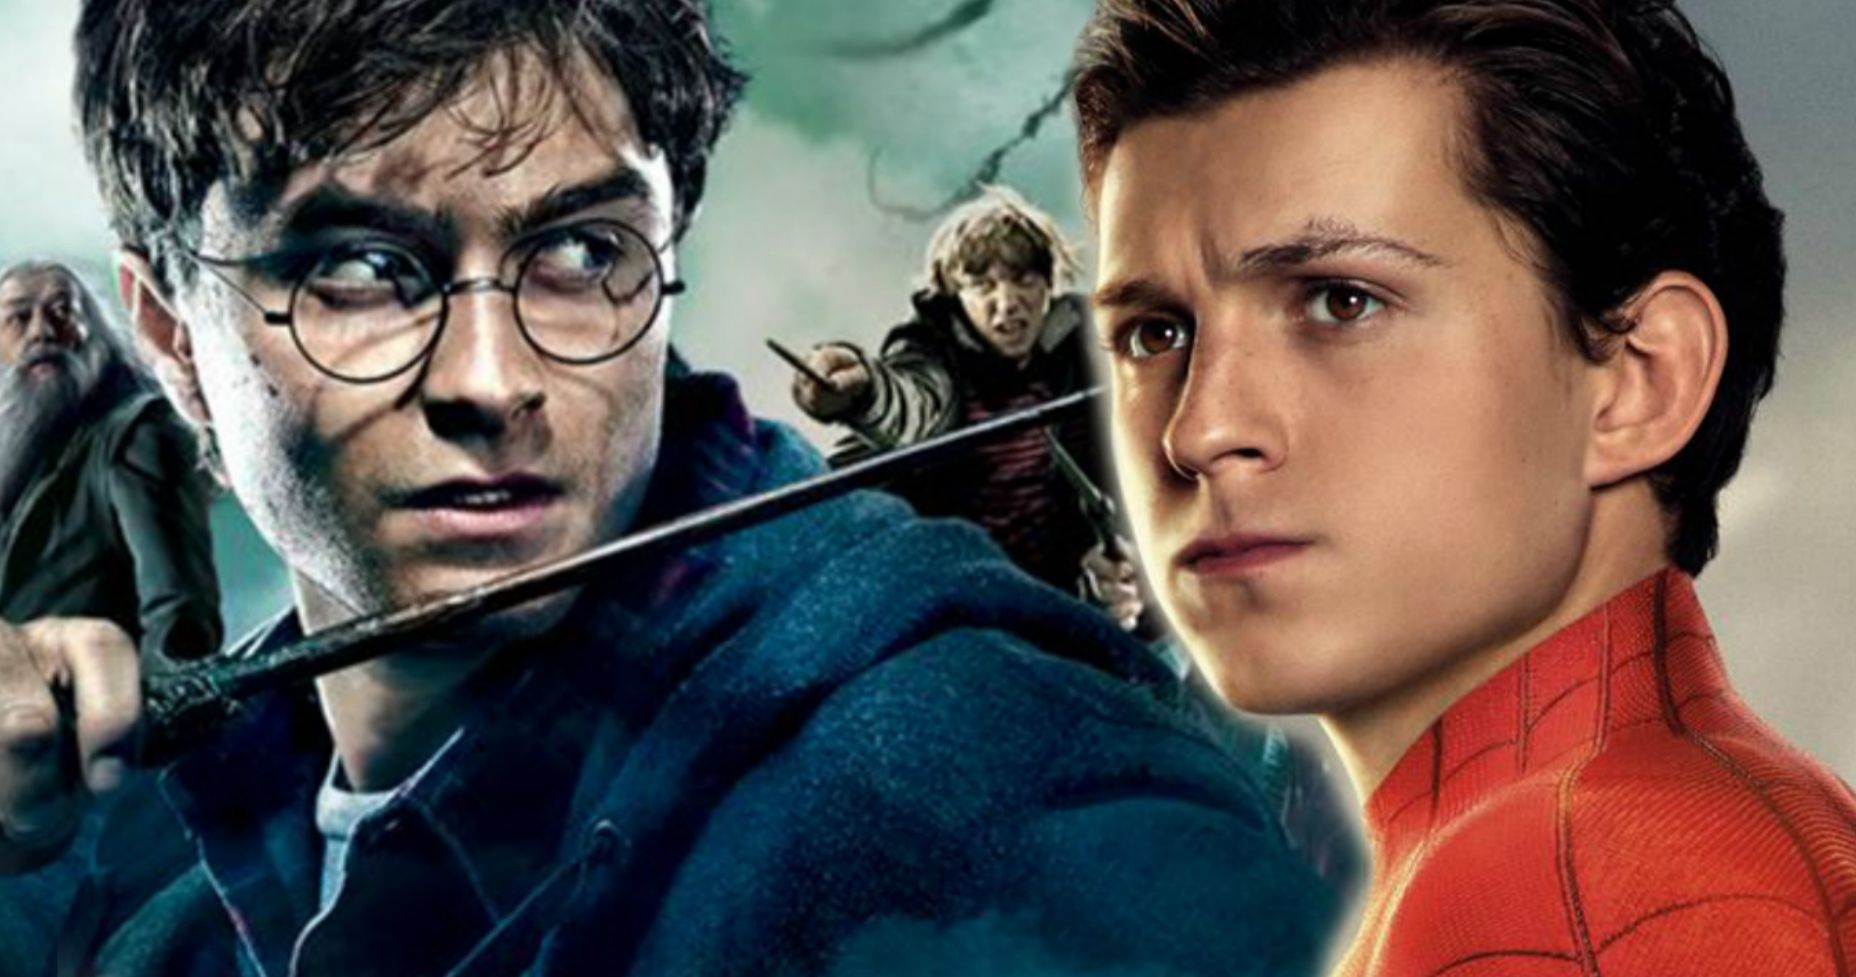 Tom Holland Thinks He Knows More About Harry Potter Than J.K. Rowling